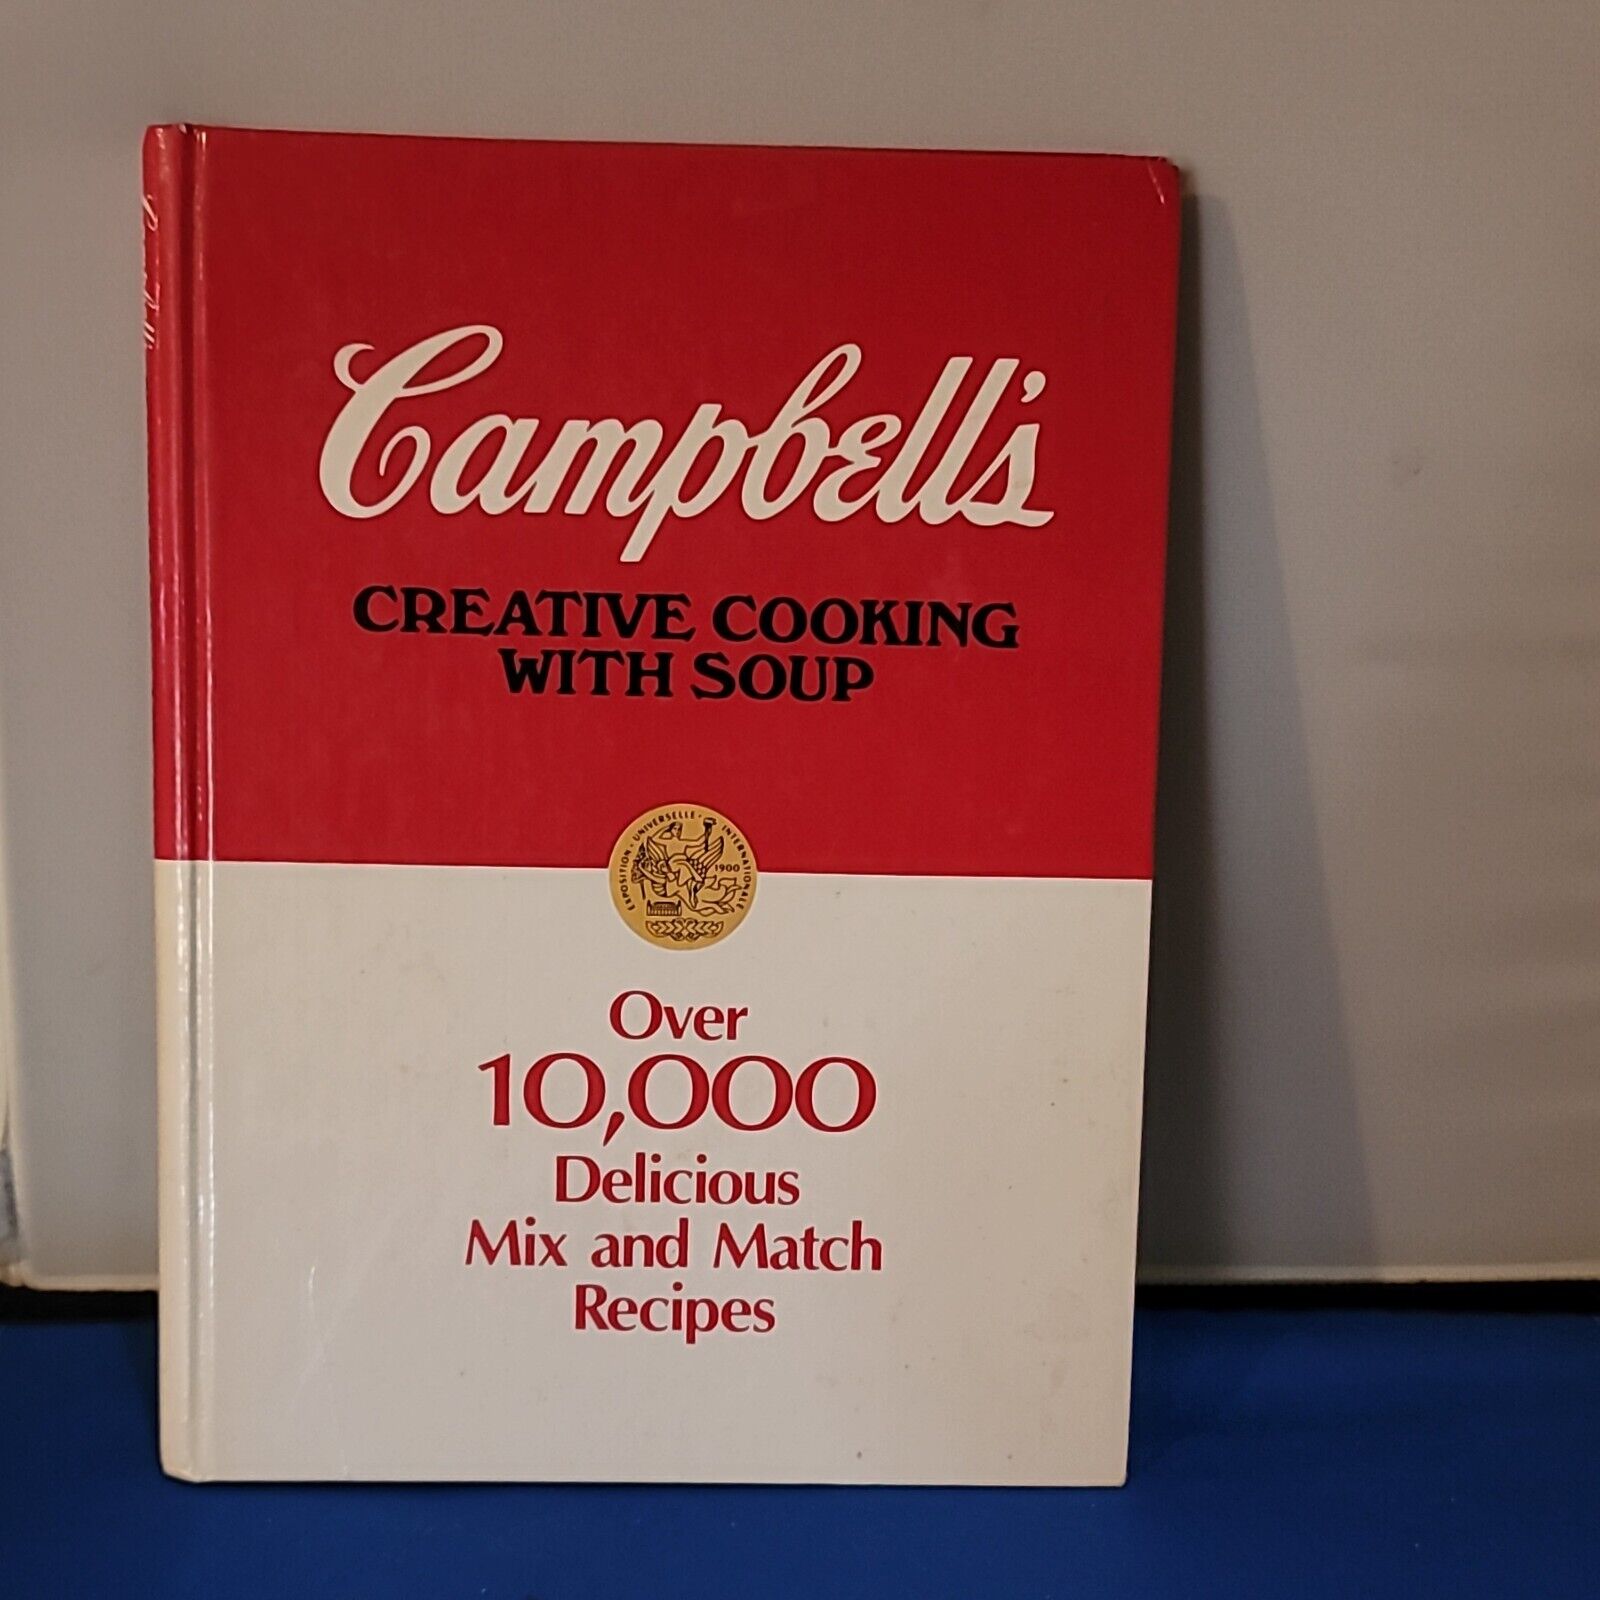 Campbells Creative Cooking With Soup 10,000 Mix and Match Recipes 1988 Hardcover